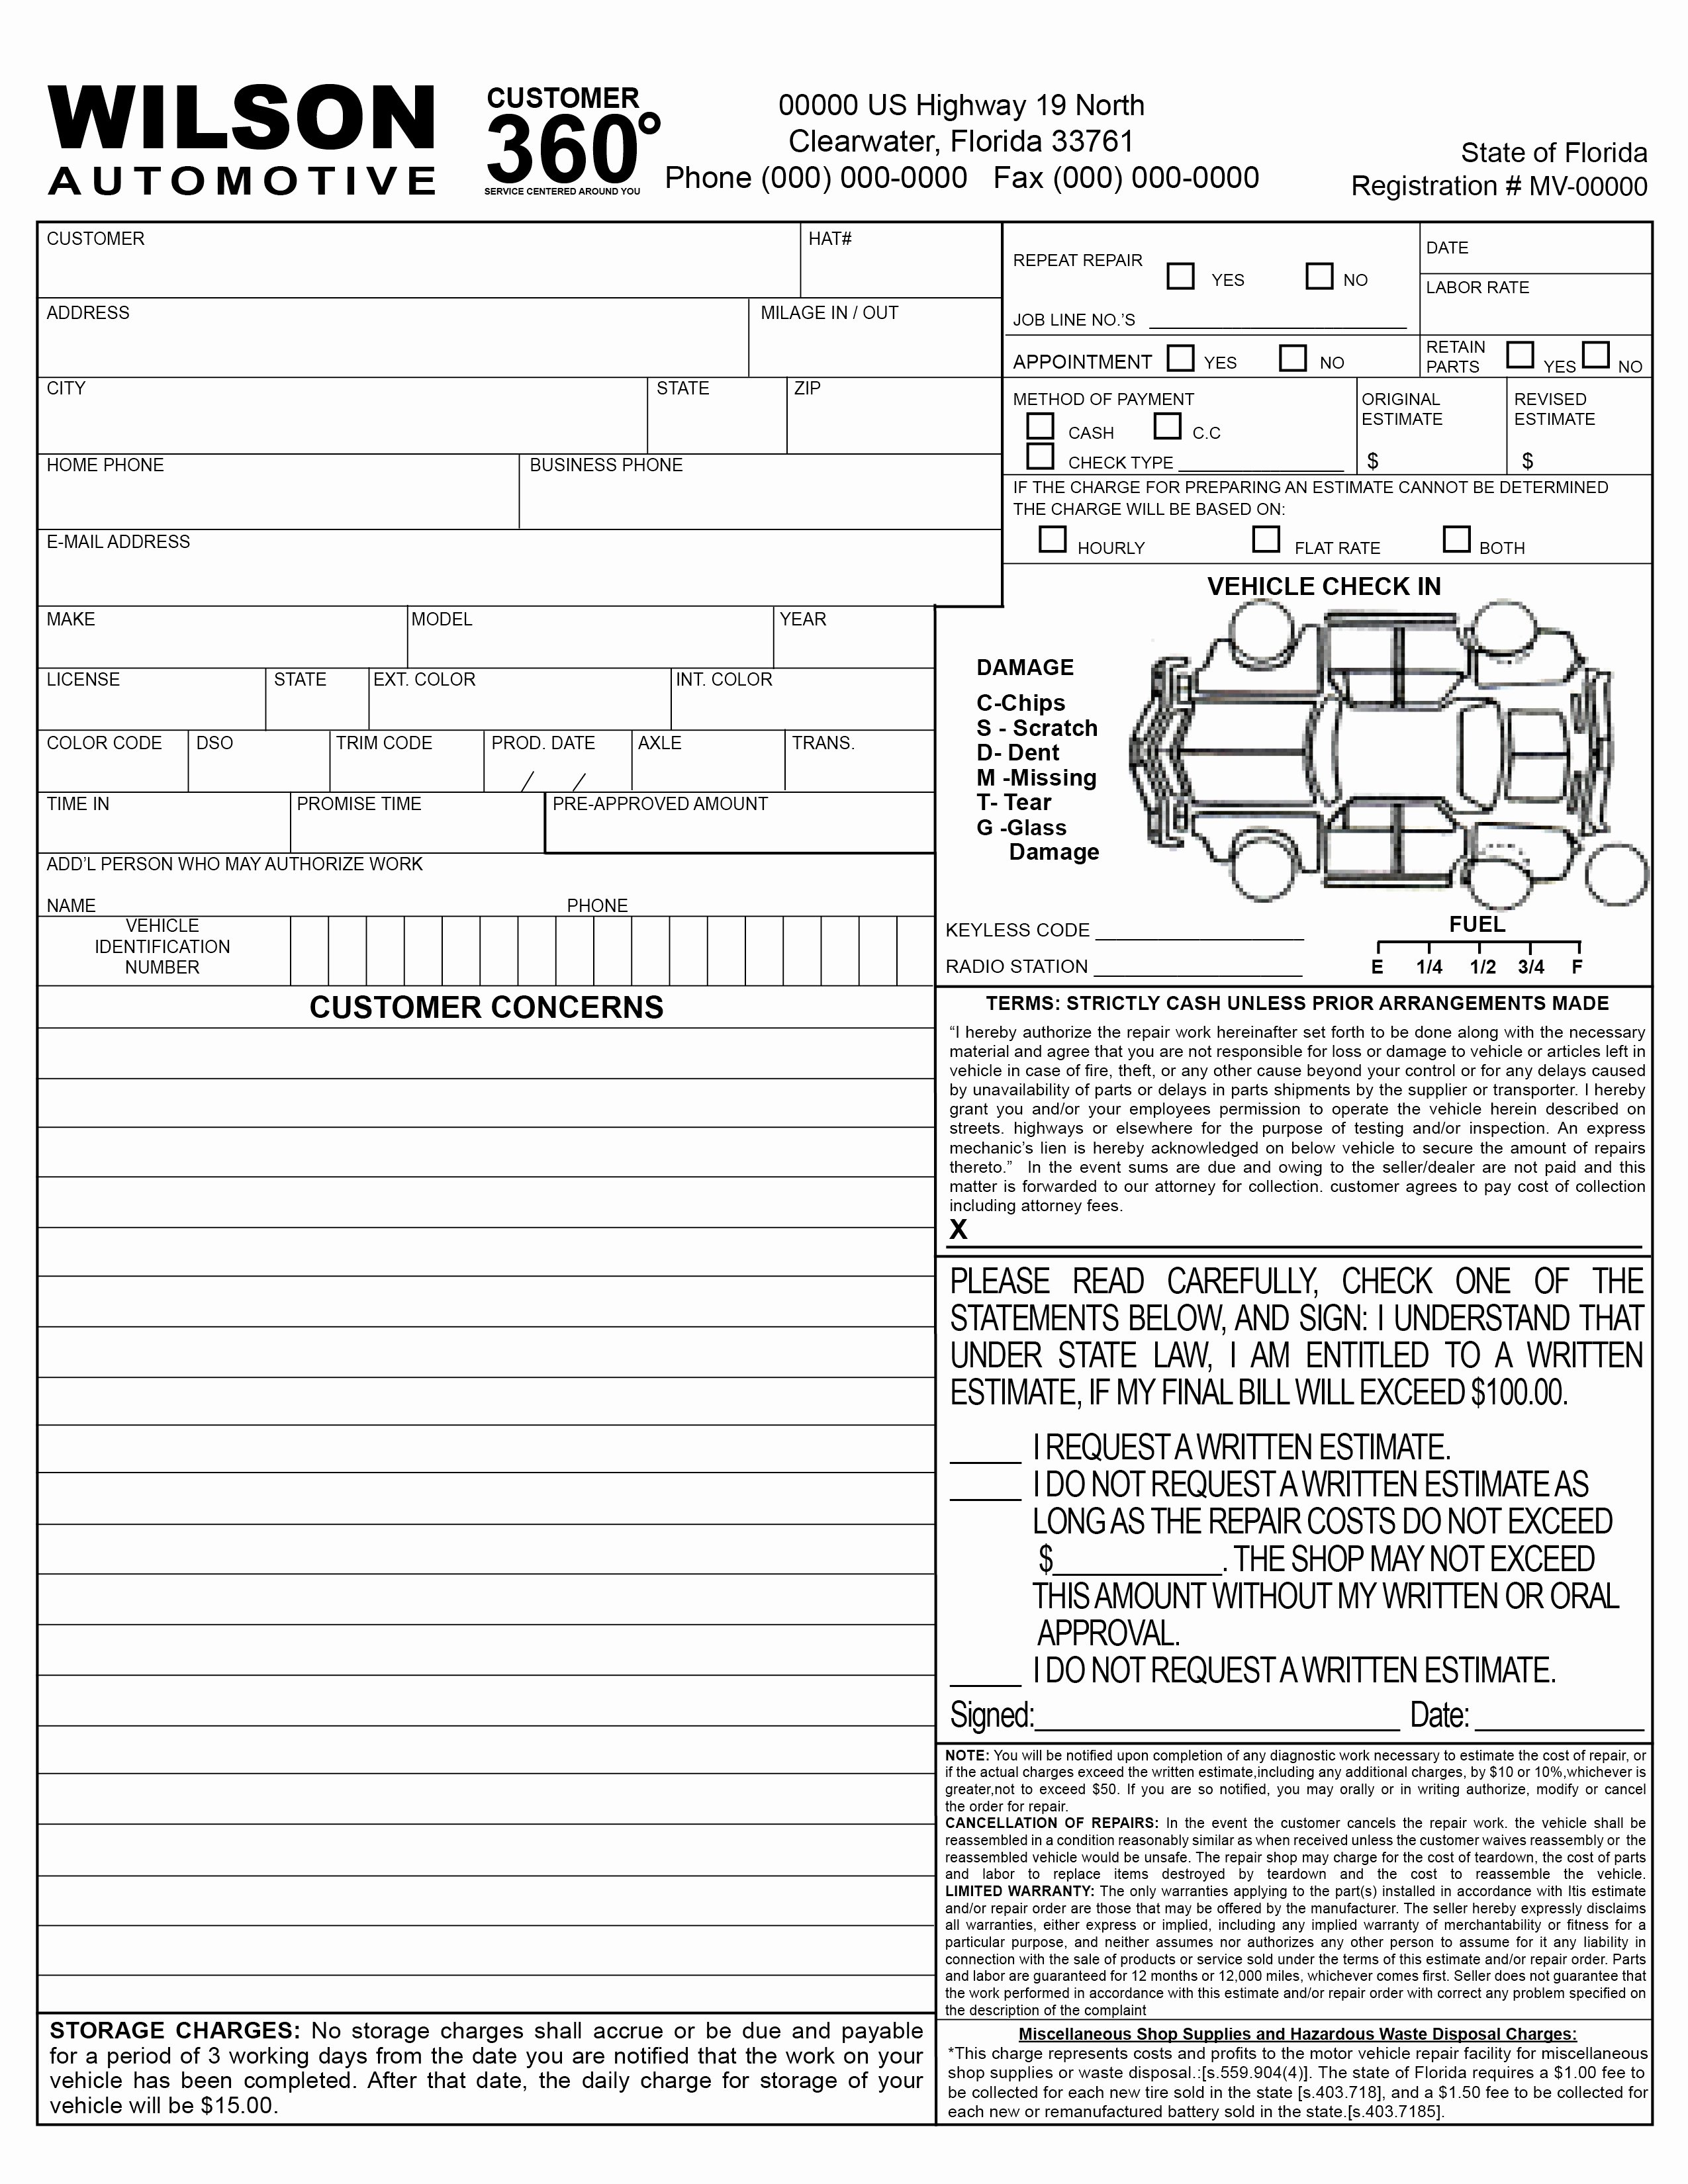 New Free Printable Vehicle Inspection form